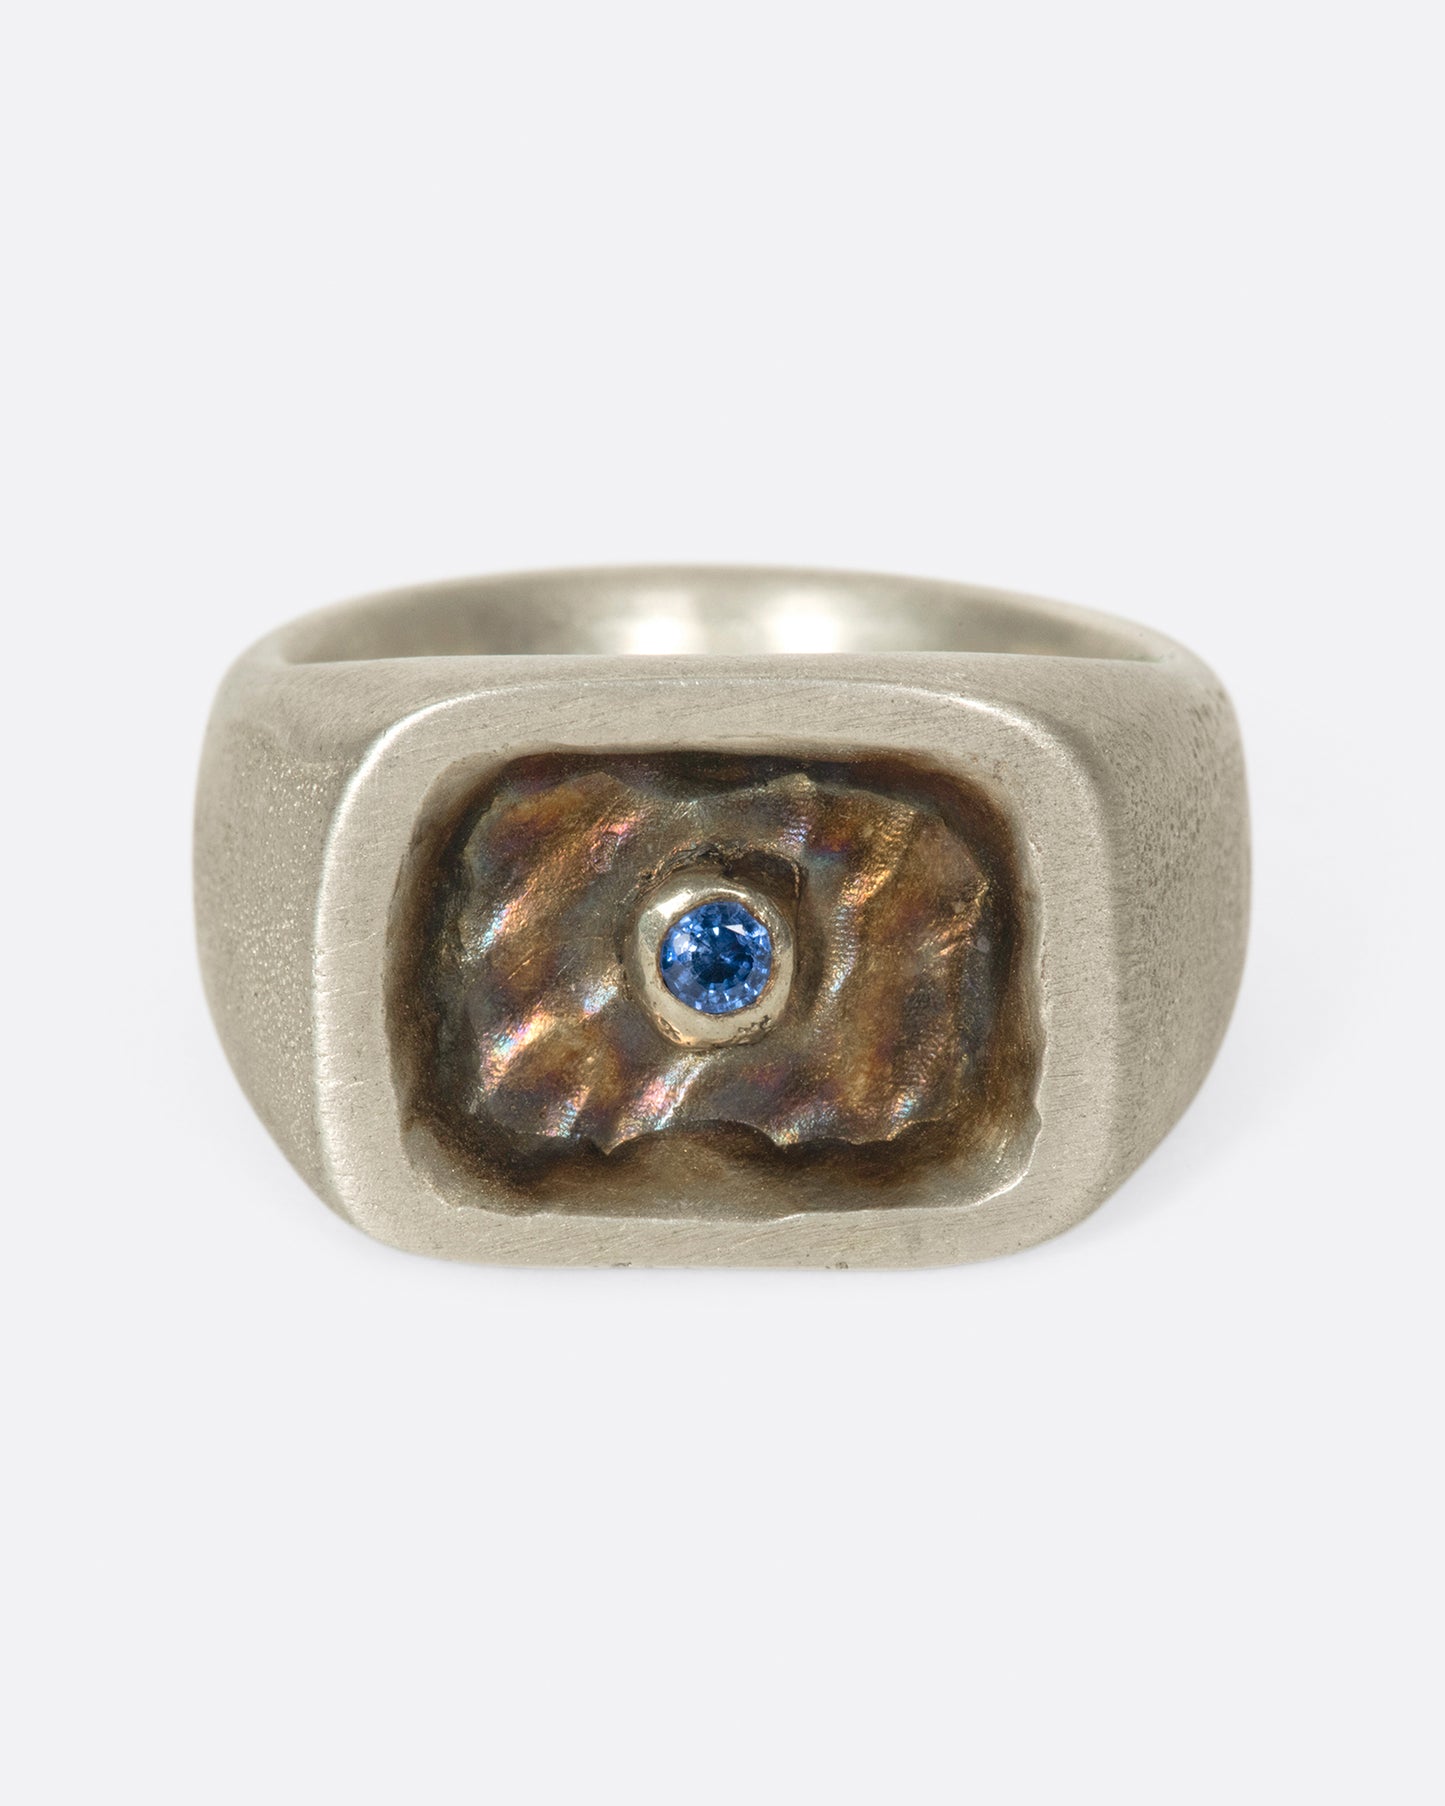 A solid, hand carved signet ring with gold plating and a royal blue sapphire.